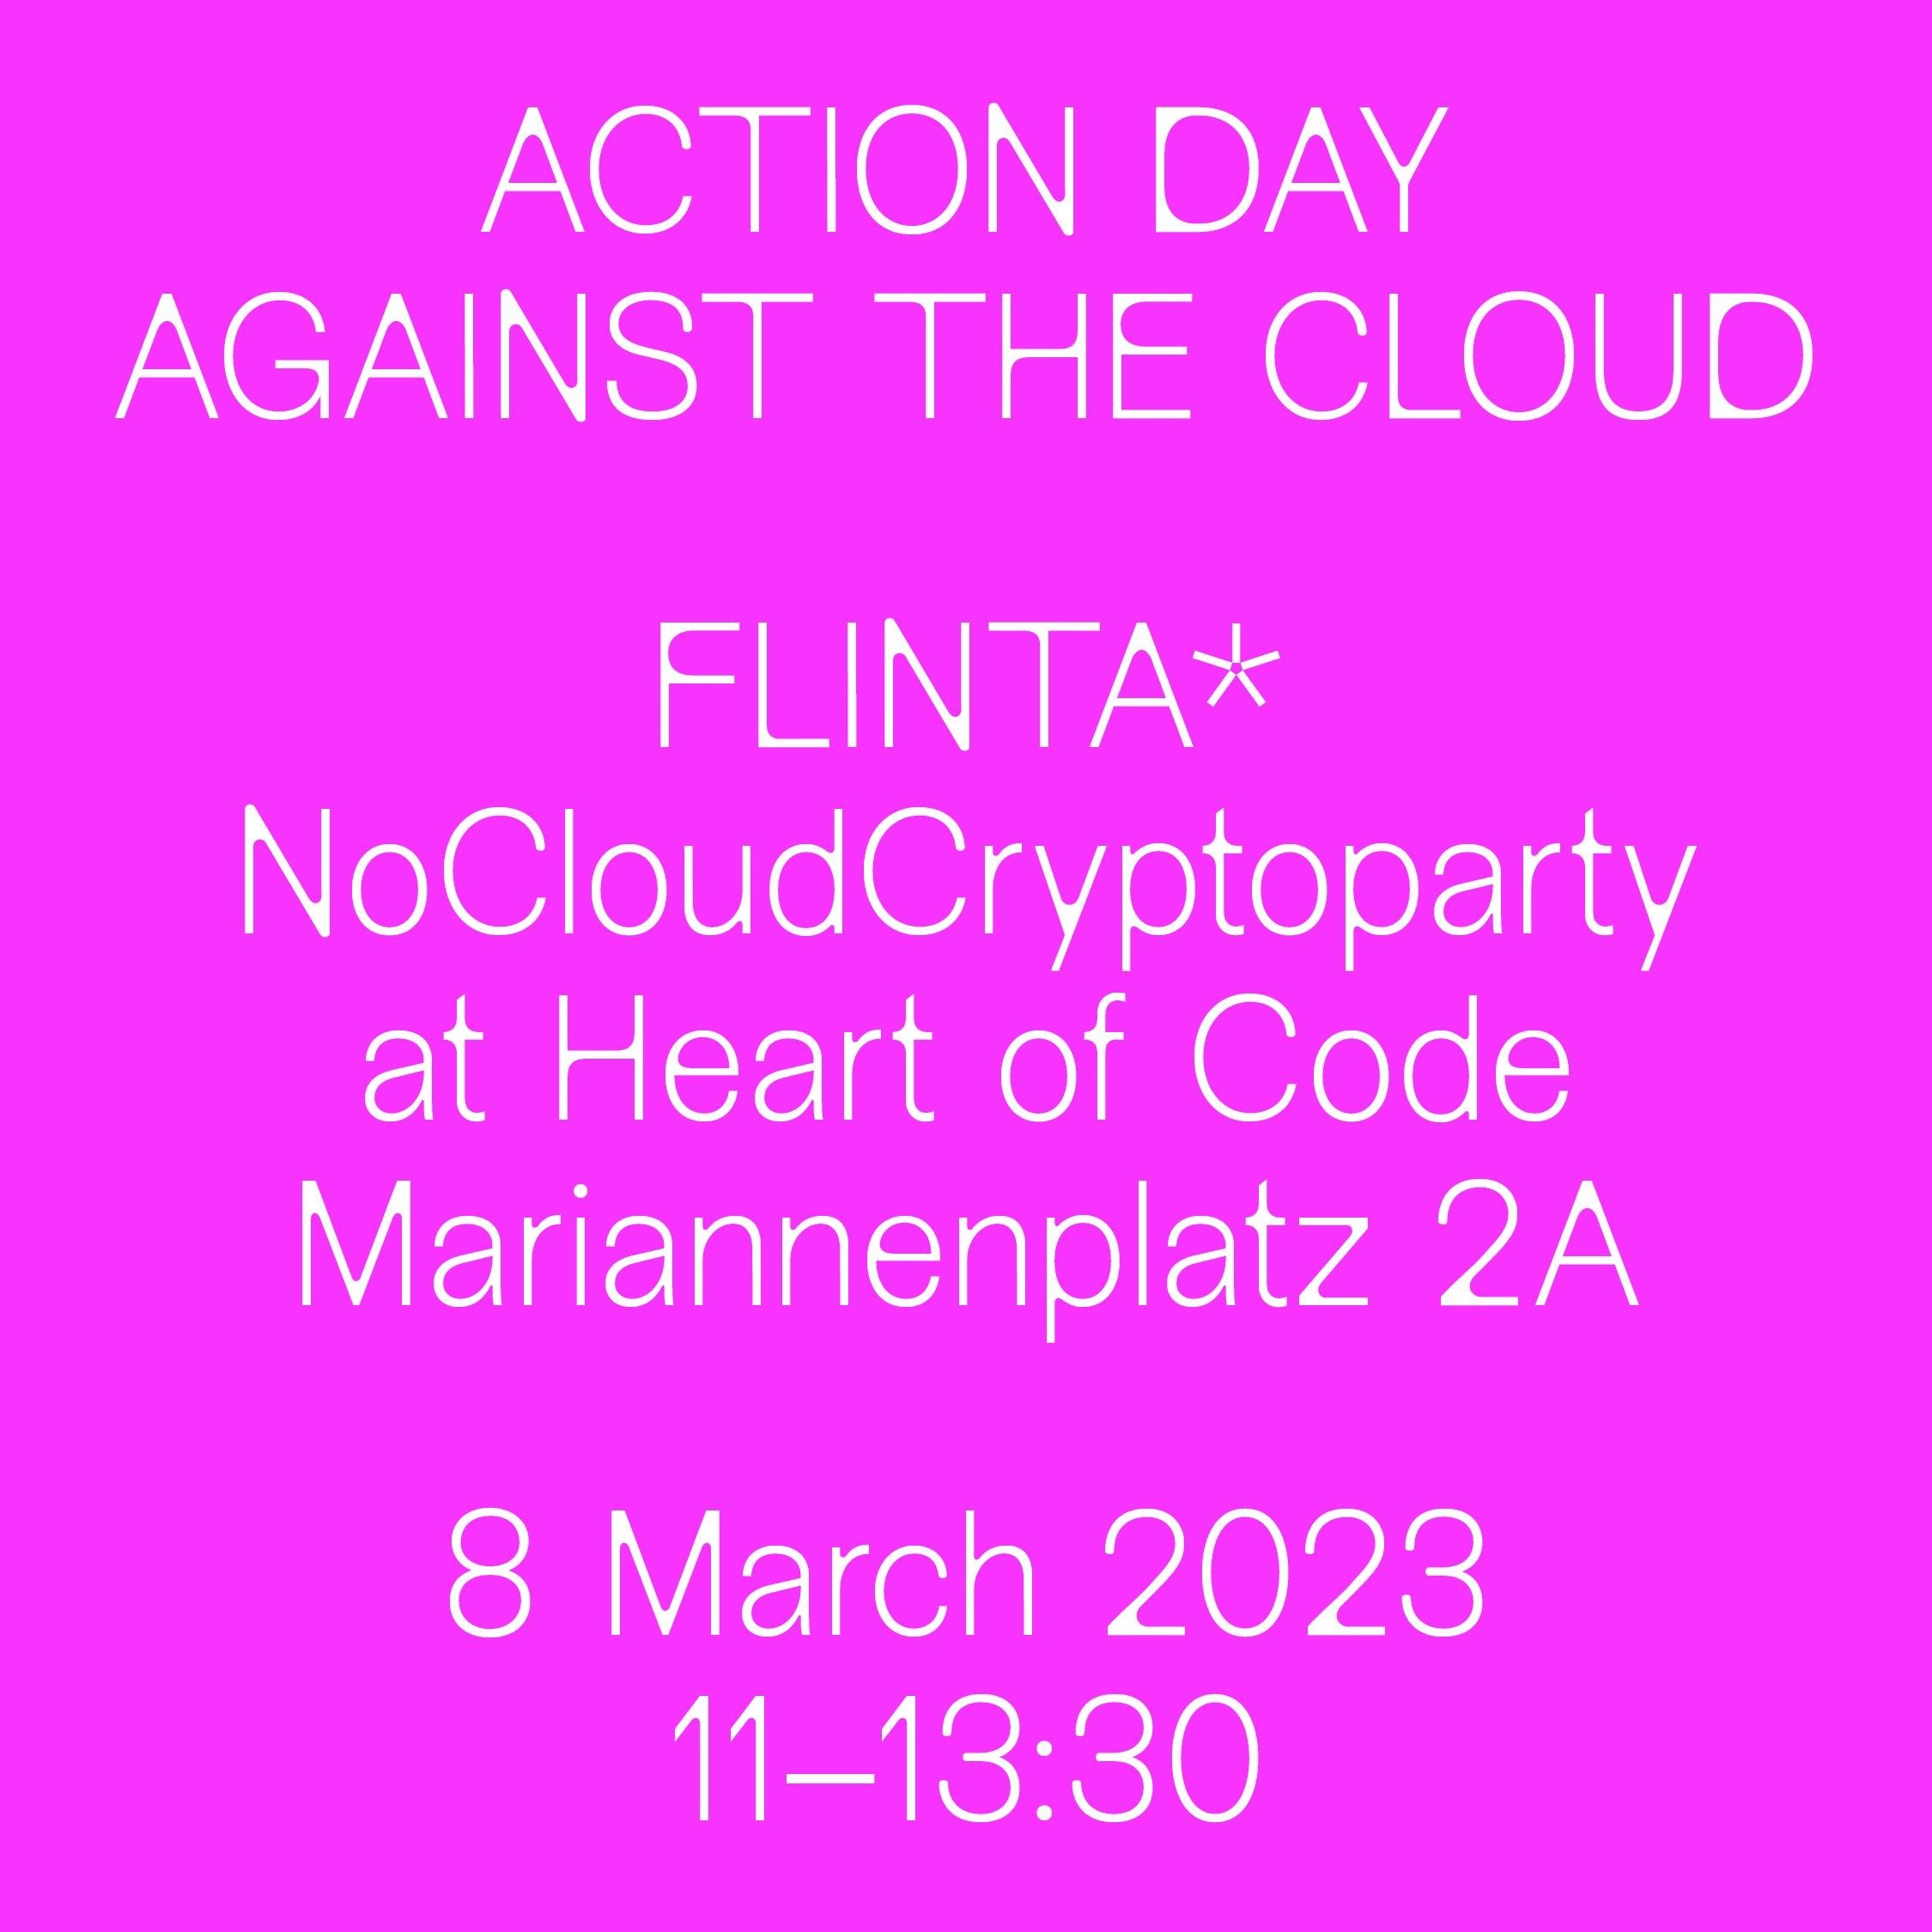 pink background with with typo 'Action day agains the cloud. FLINTA* NoCloudCryptoParty at Heart of code, Mariannenplatz 2A, 8. March 2023, 11-13:30'